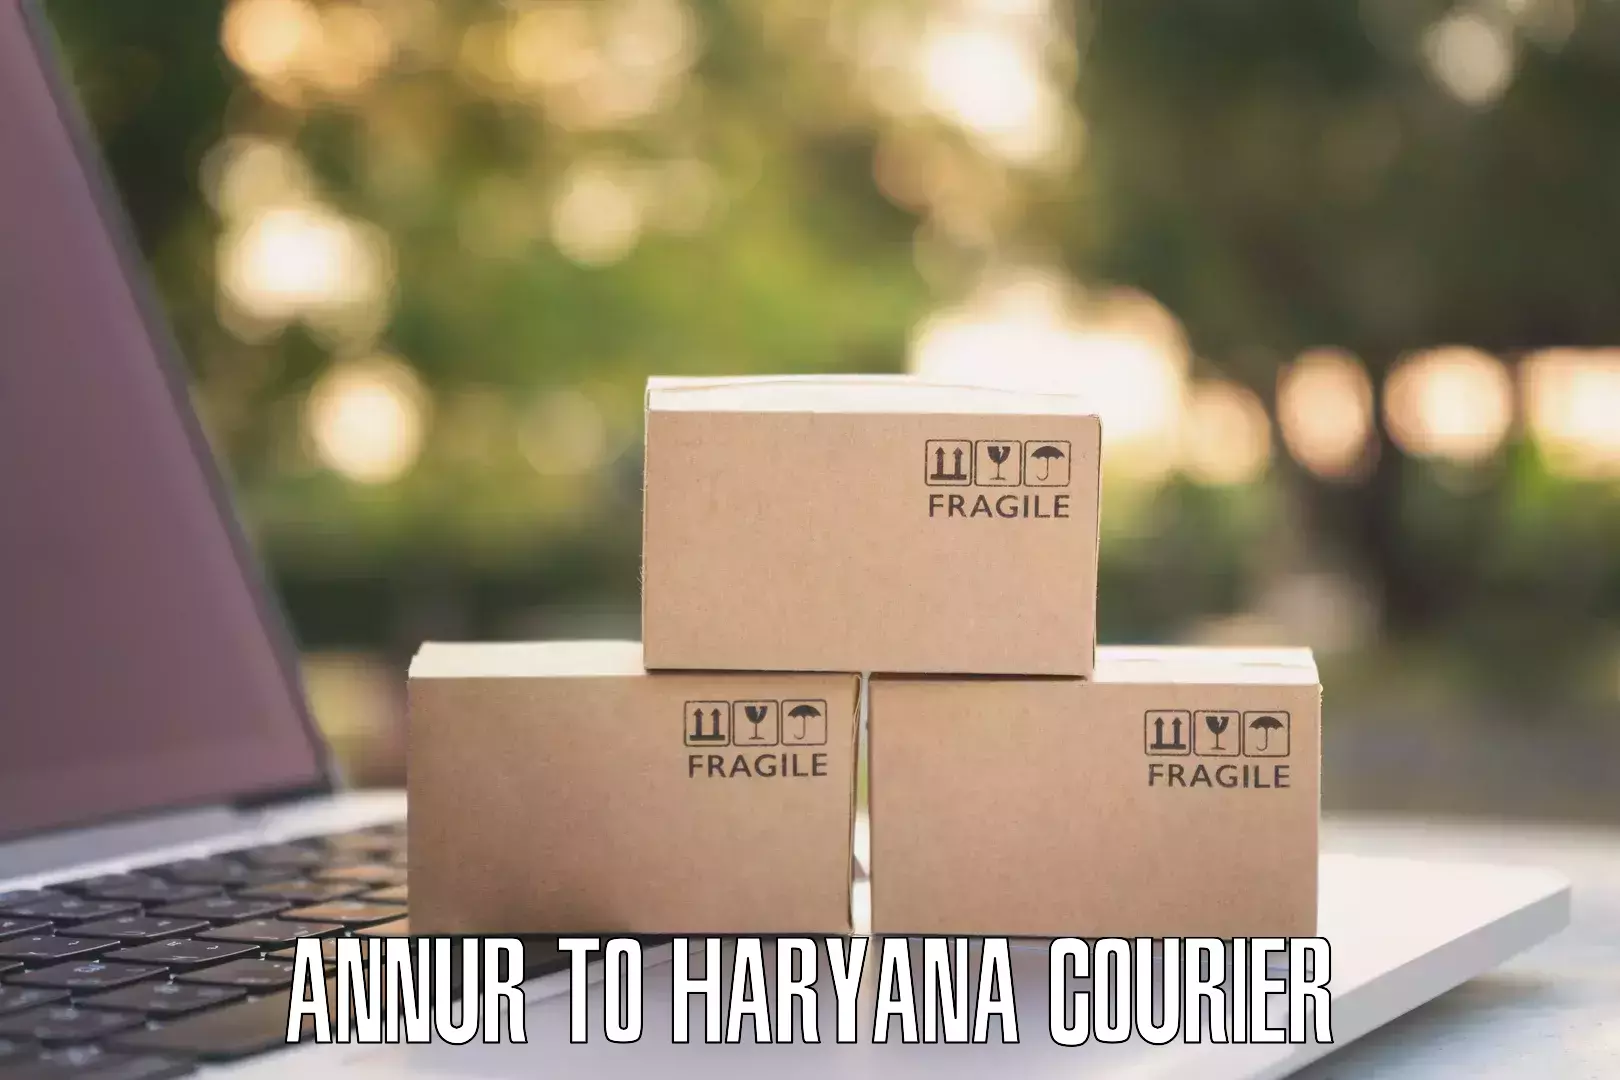 Business delivery service Annur to Narwana